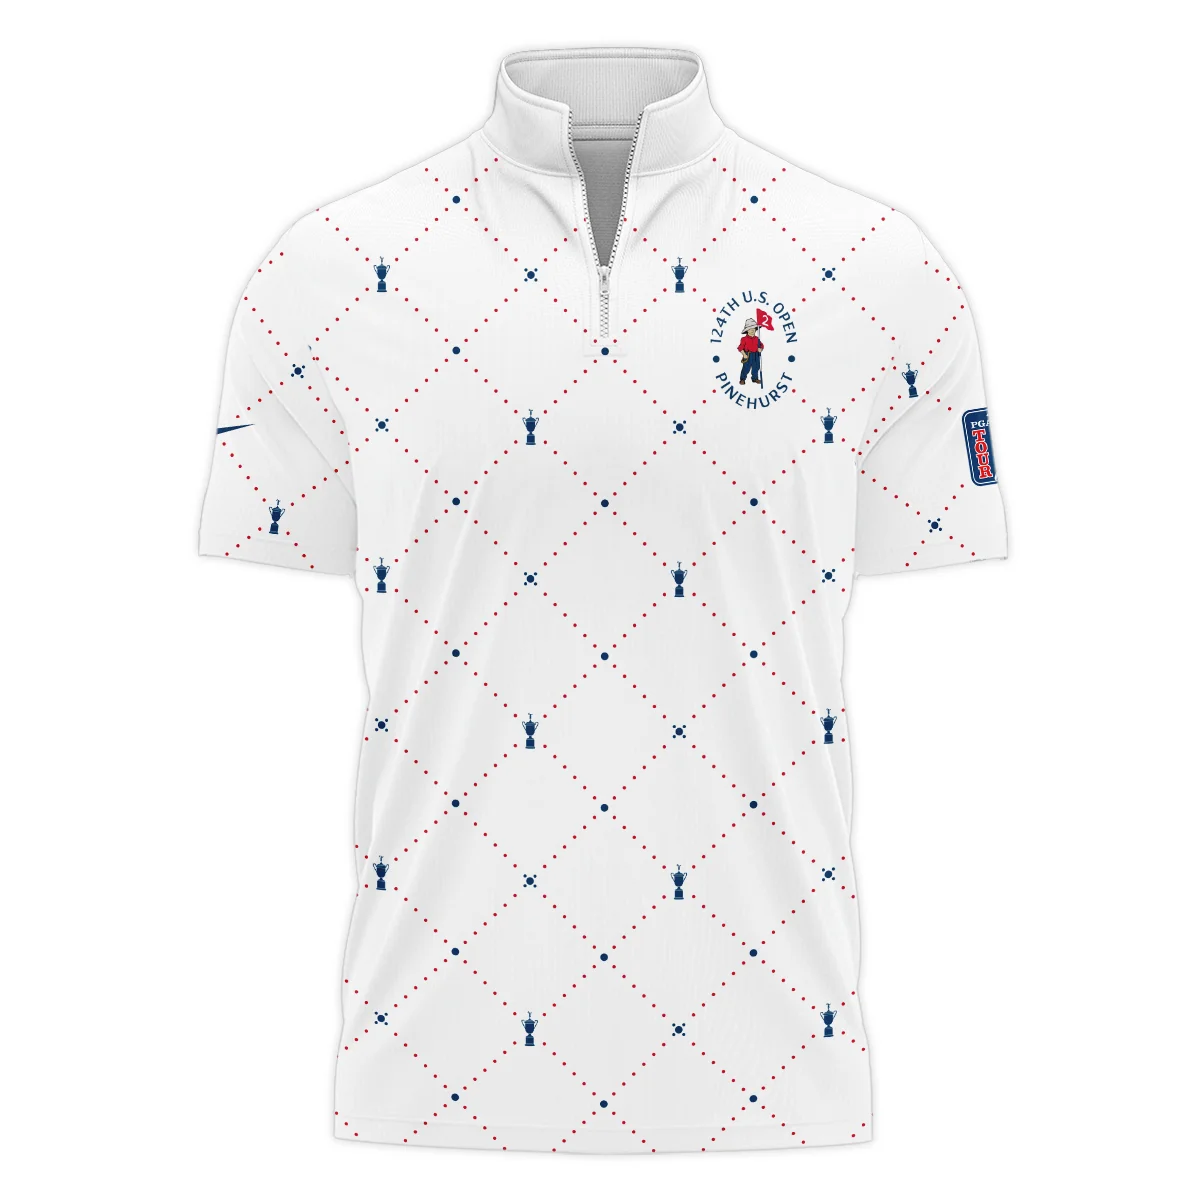 Argyle Pattern With Cup 124th U.S. Open Pinehurst Nike Style Classic, Short Sleeve Polo Shirts Quarter-Zip Casual Slim Fit Mock Neck Basic